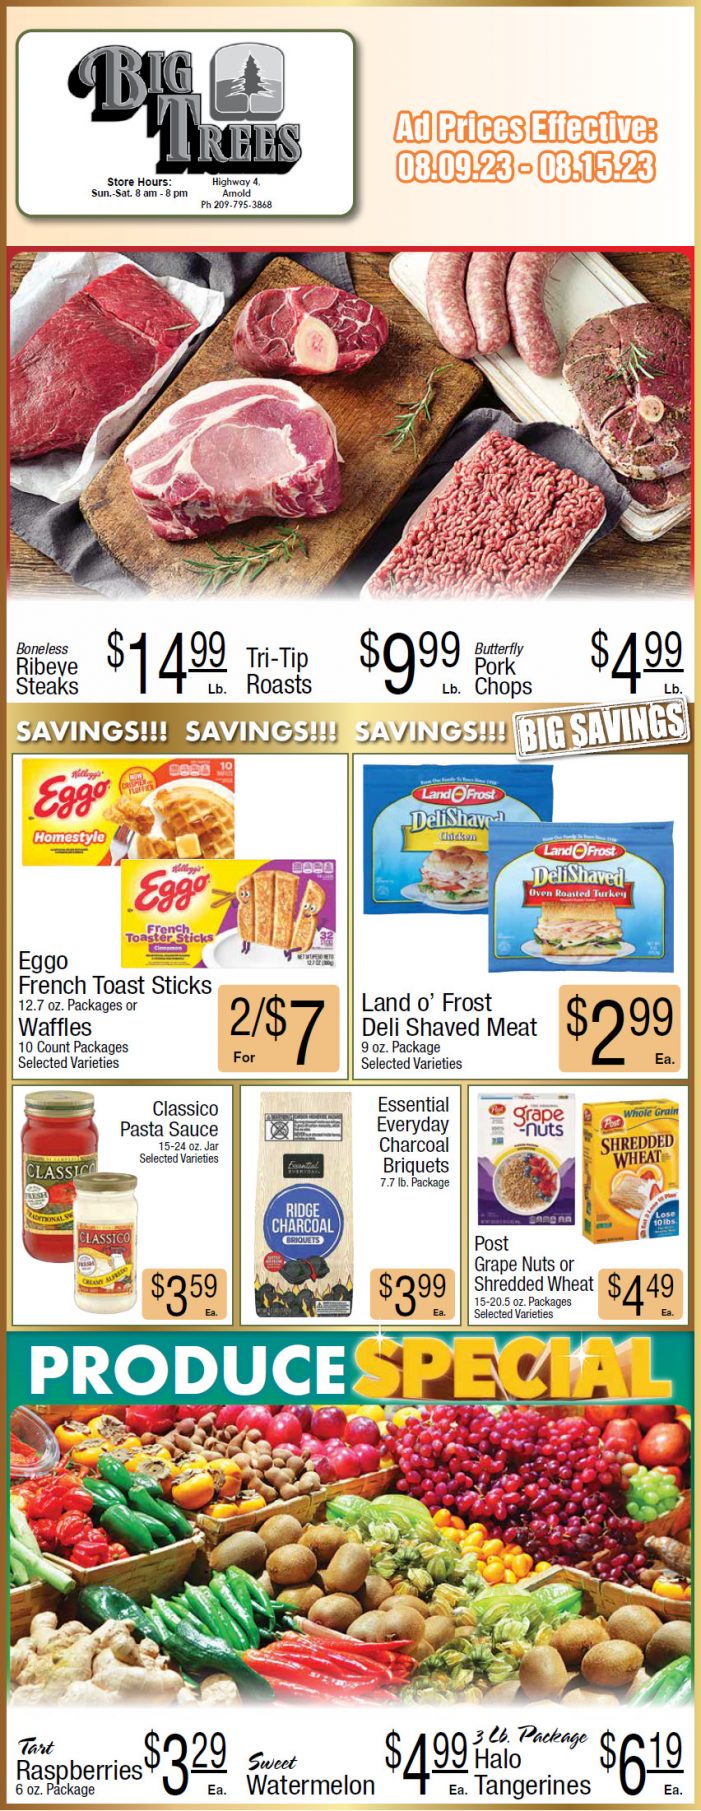 Big Trees Market Weekly Ad, Grocery, Produce, Meat & Deli Specials Through August 15th!  Shop Local & Save!